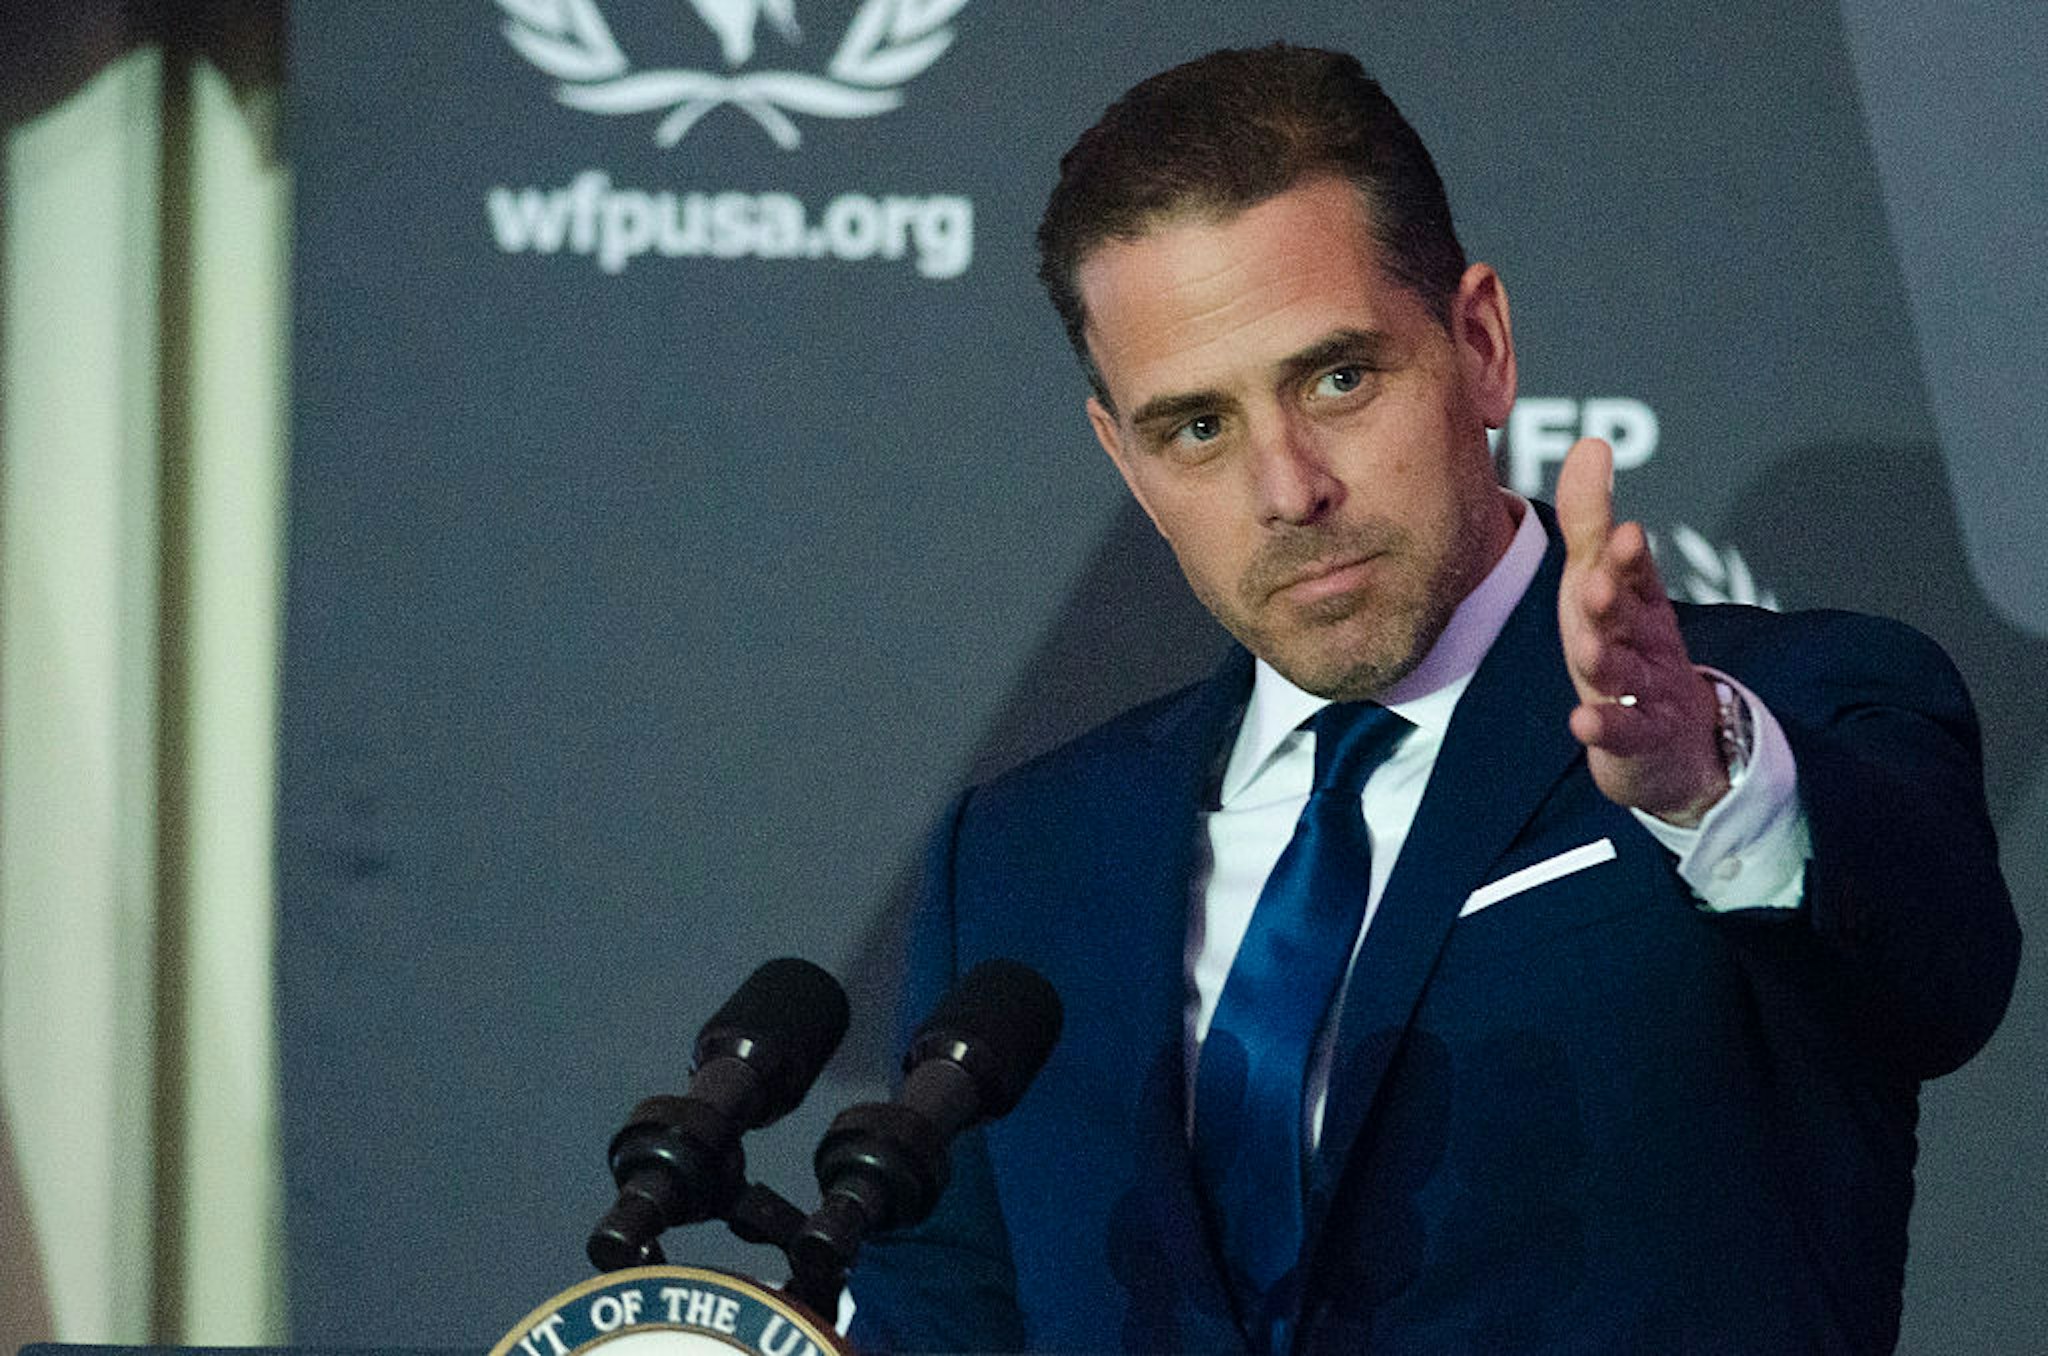 Hunter Biden's legal team has another laptop, and they claim it could help disprove damning revelations from the one he abandoned at a Delaware repair shop